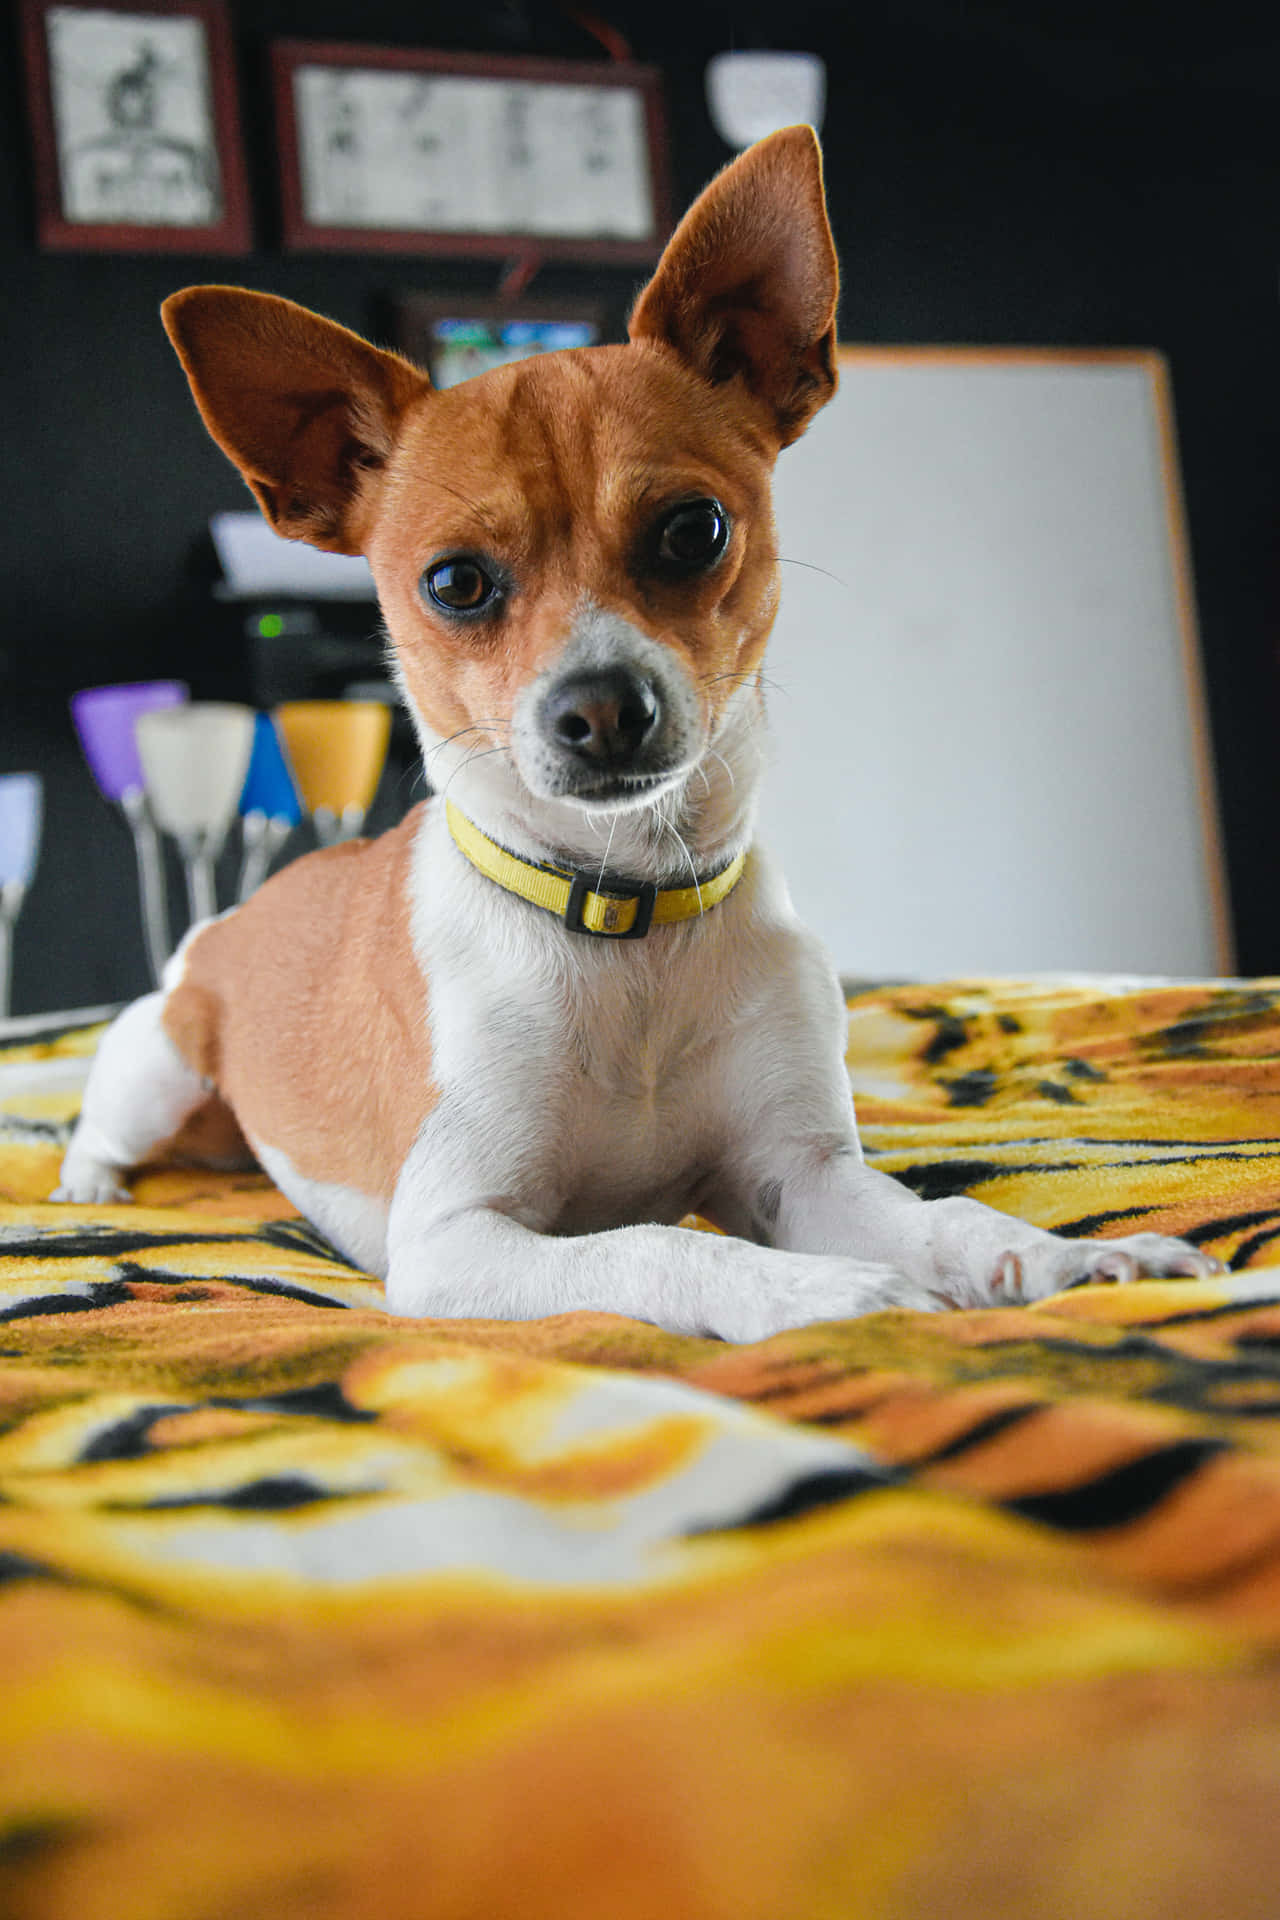 A cute, alert Chihuahua looks curiously up at the camera